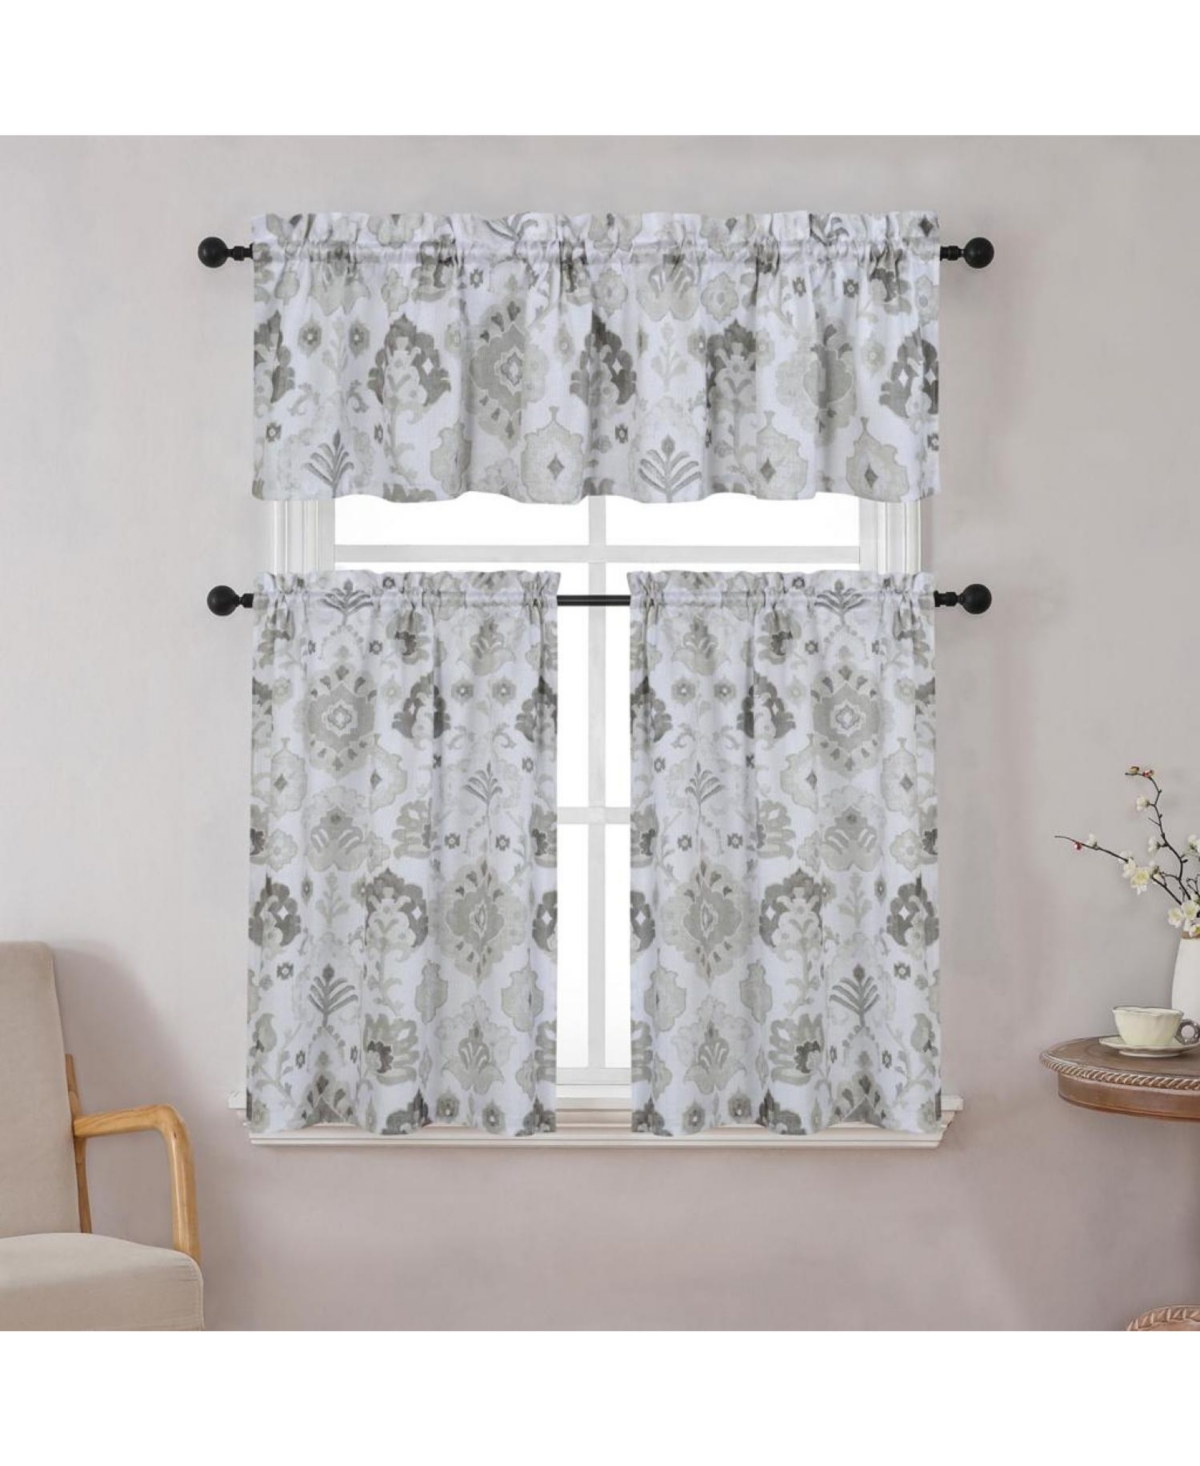 Mystic Seaport Watercolor Rod Pocket Complete 3 Piece Cafe Kitchen Curtain Tier & Valance Set - Spice - Taupe